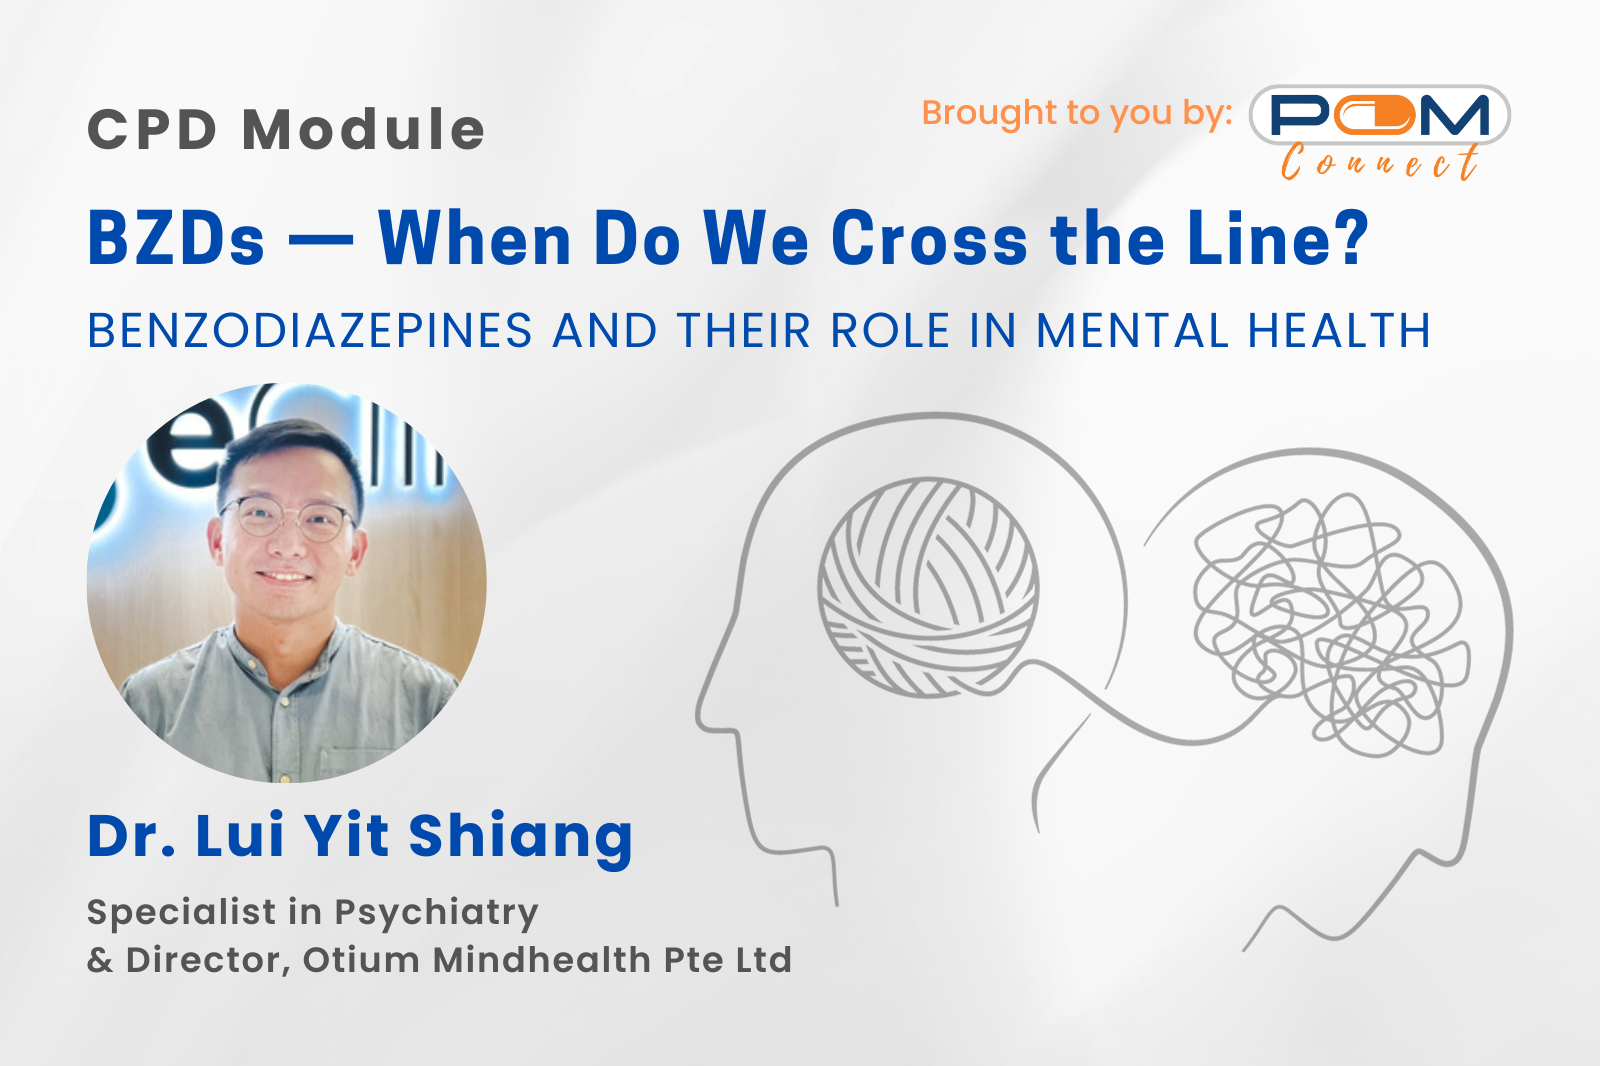 [CPD Module] BZDs: When Do We Cross the Line? – Benzodiazepines and their Role in Mental Health